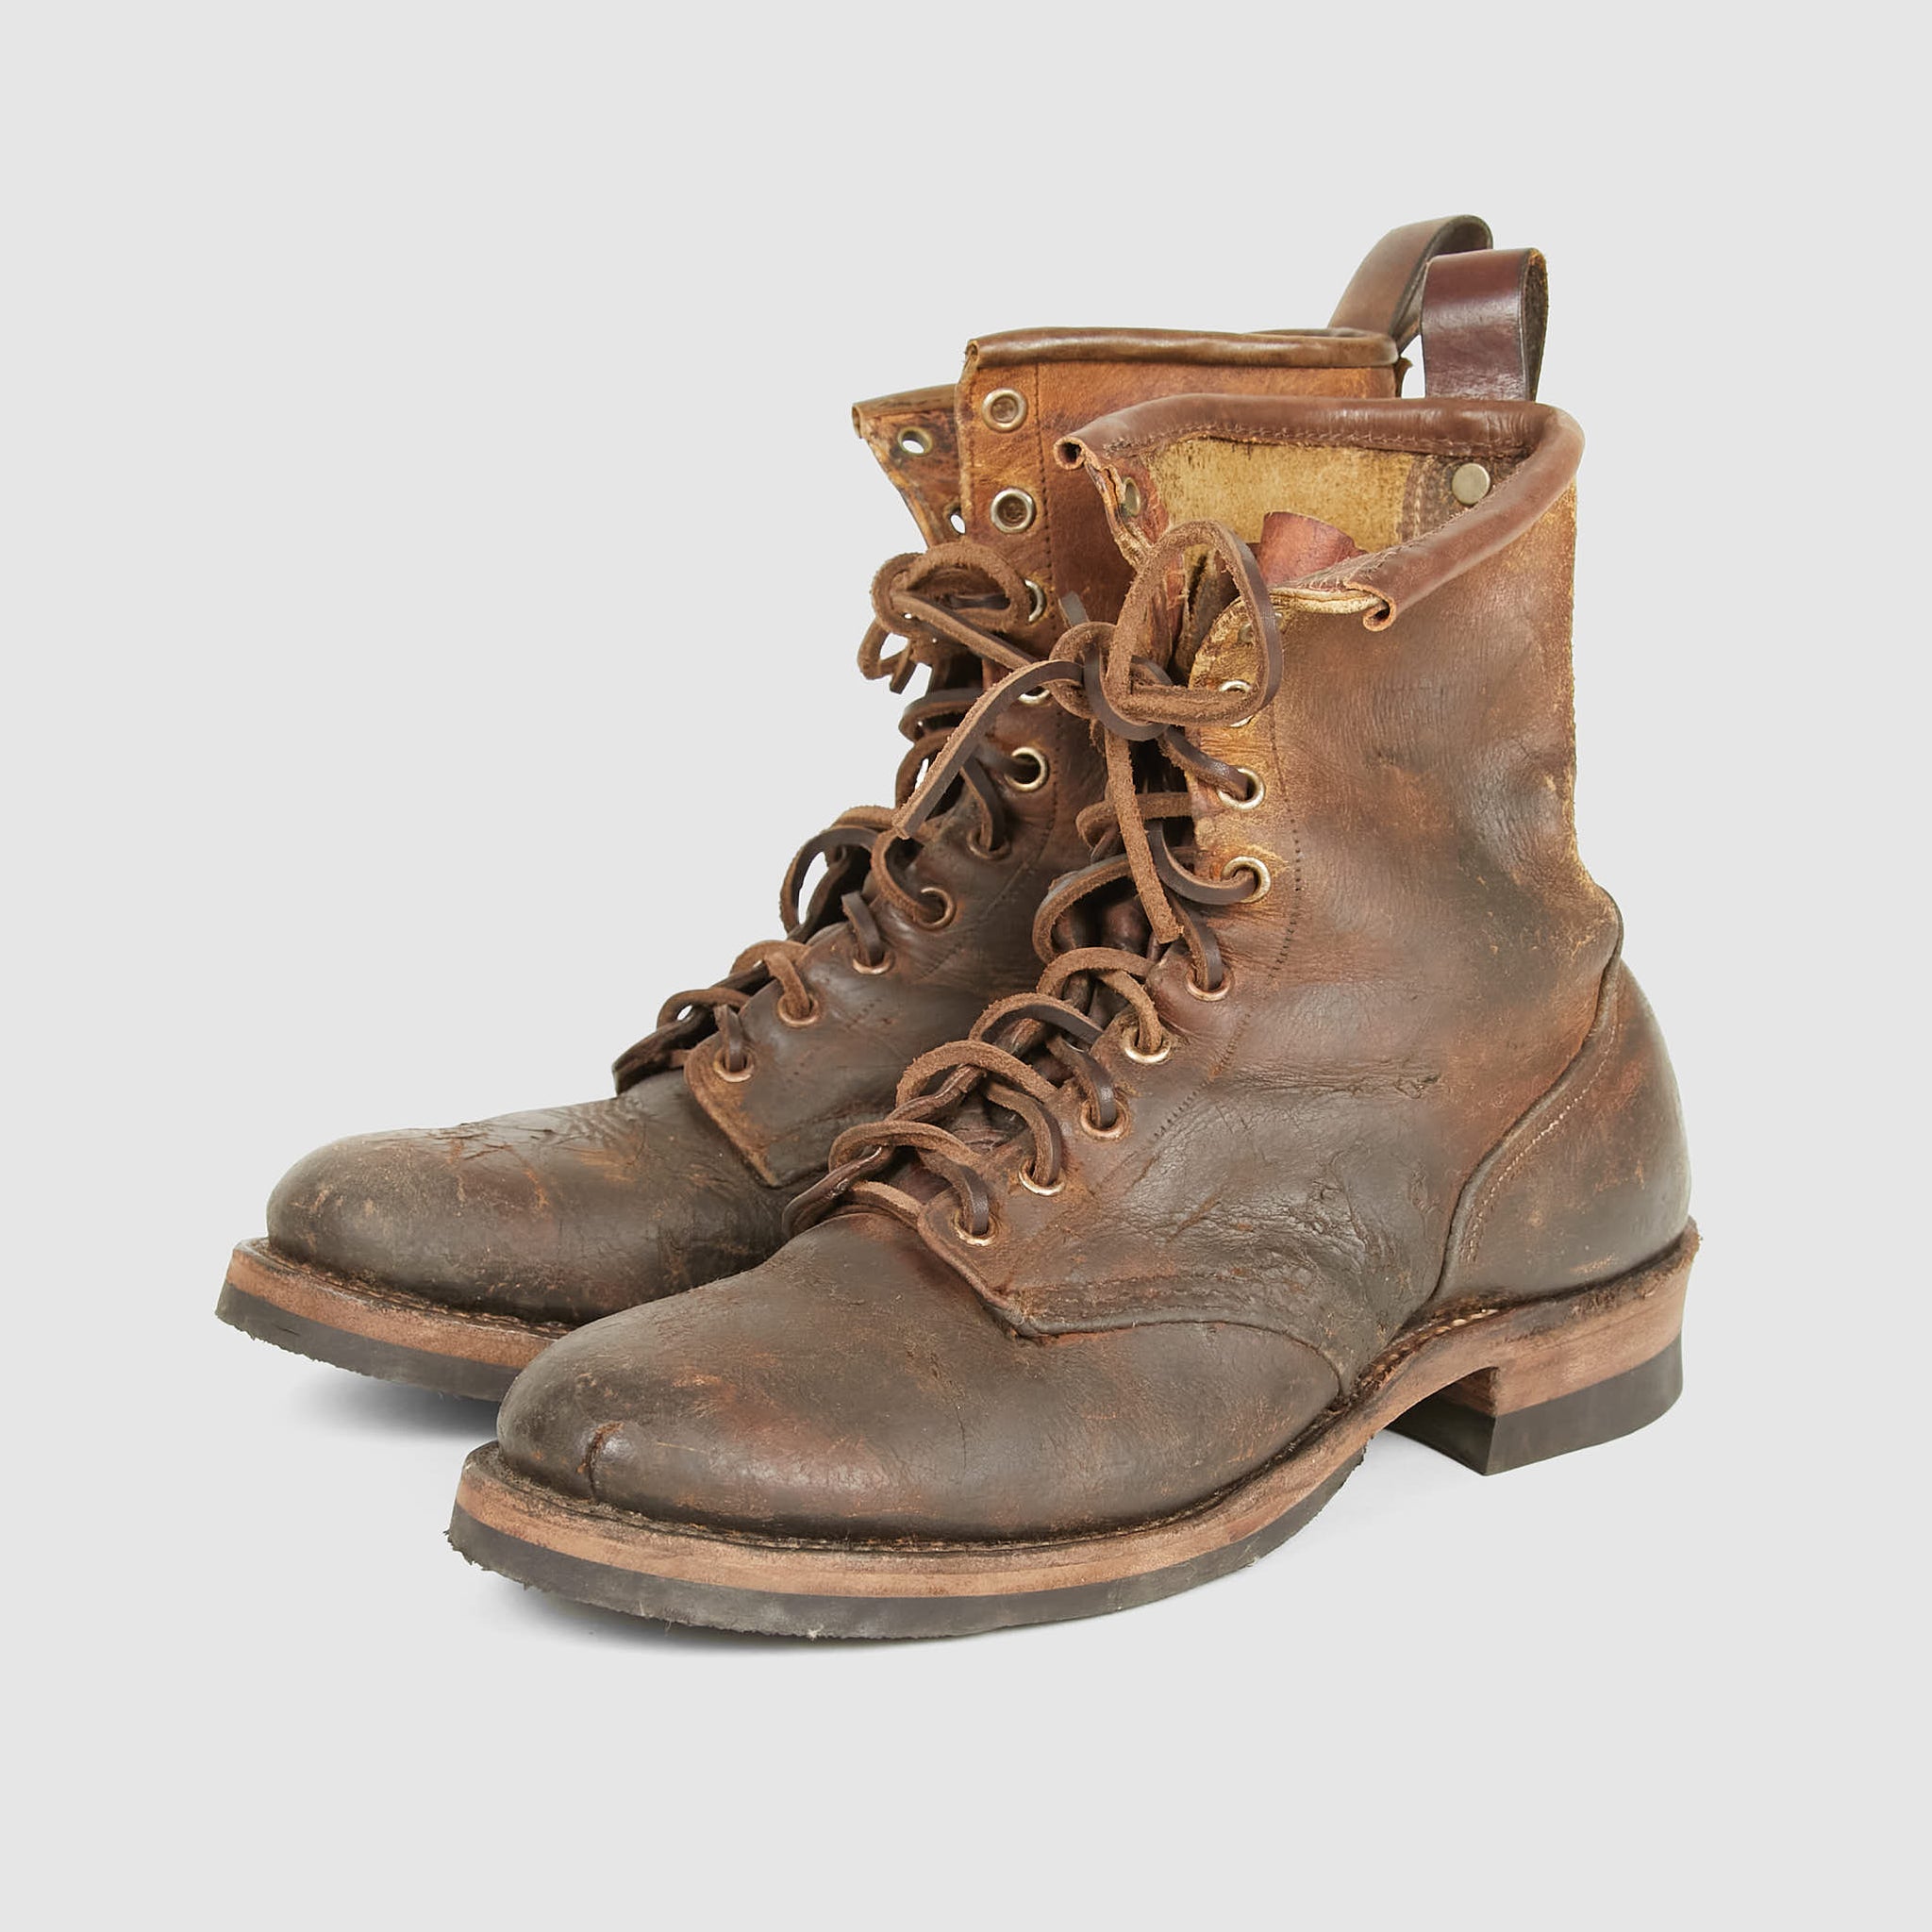 vintage-military-boots-1201main